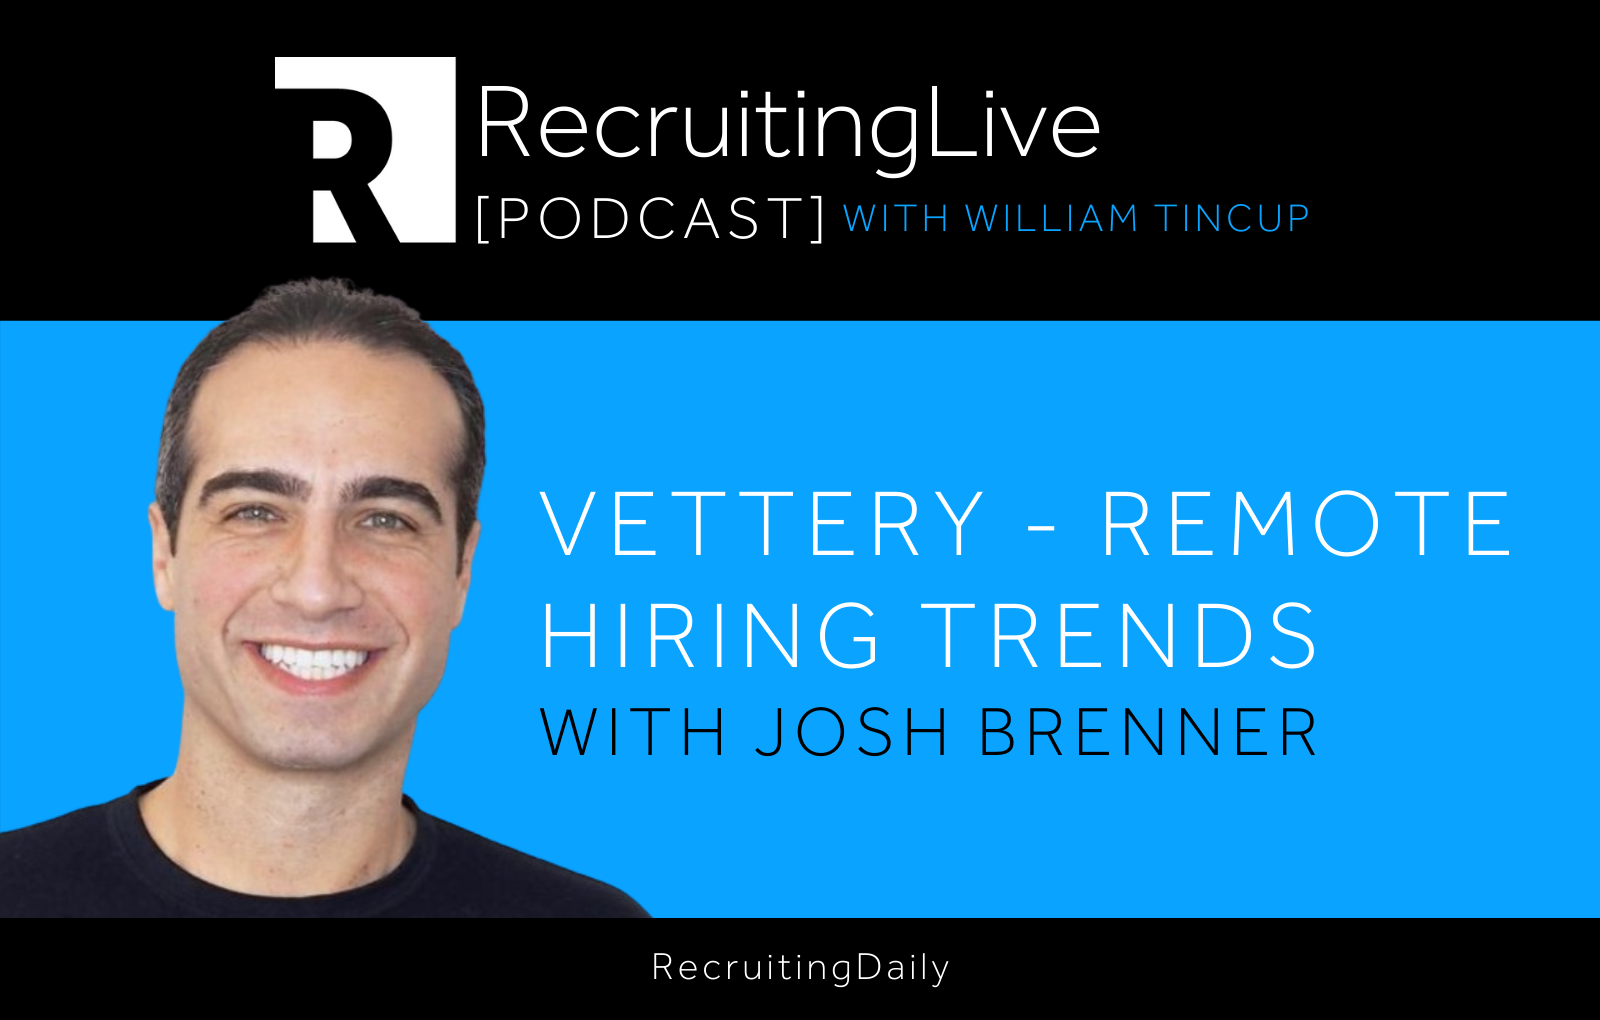 [PODCAST] Vettery - Remote Hiring Trends with Josh Brenner ...